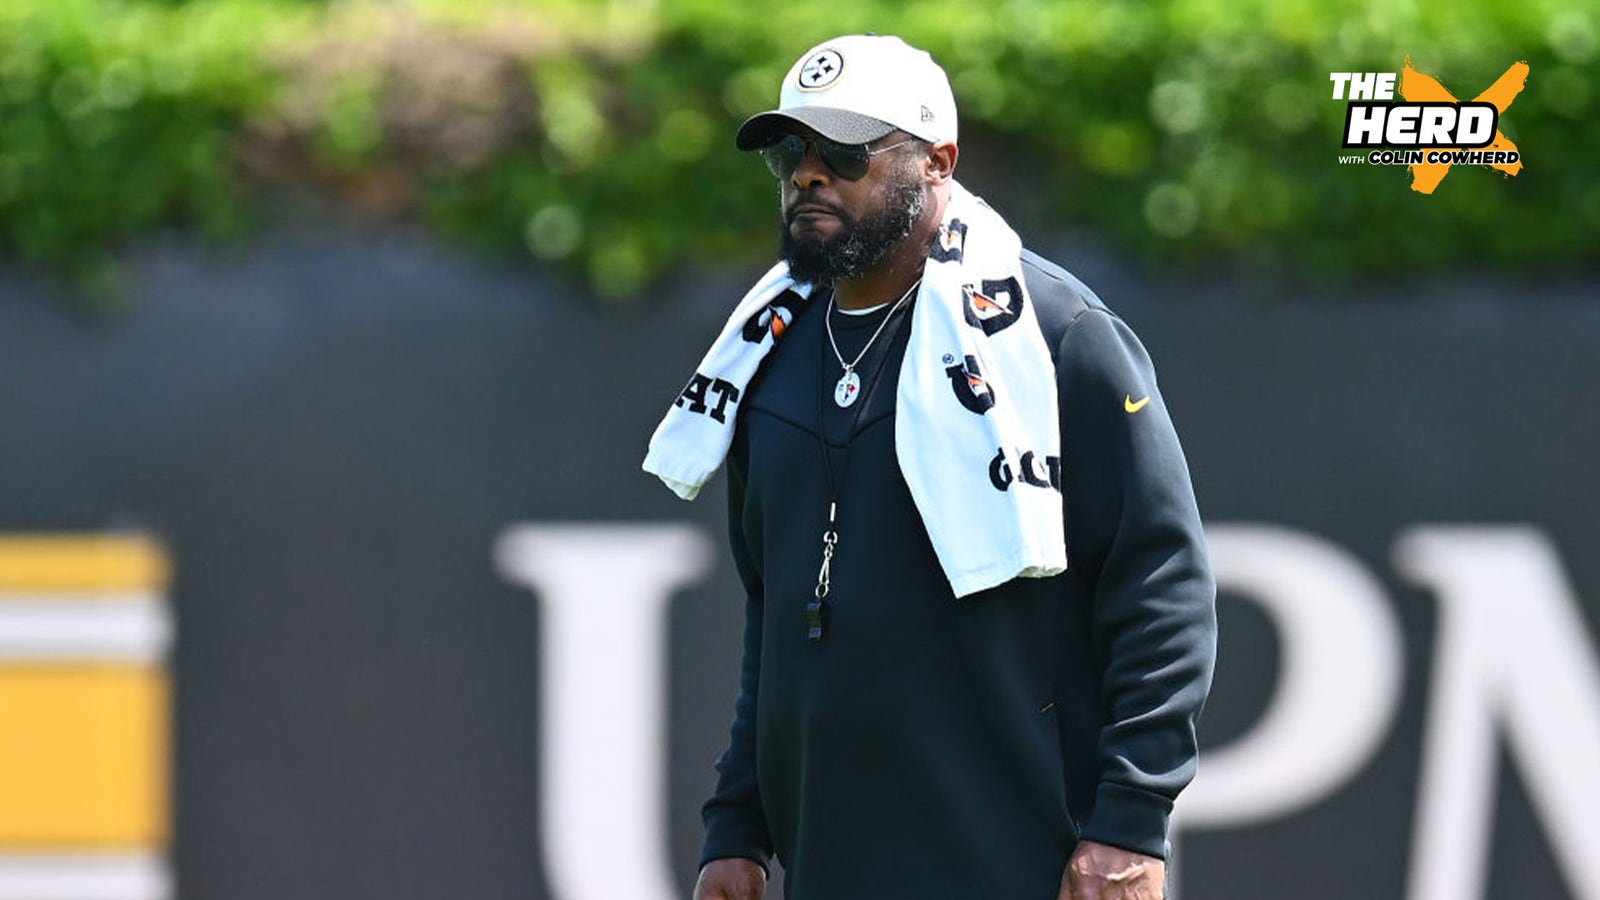 Did Mike Tomlin deserve his three-year contract extension with the Steelers? | The Herd